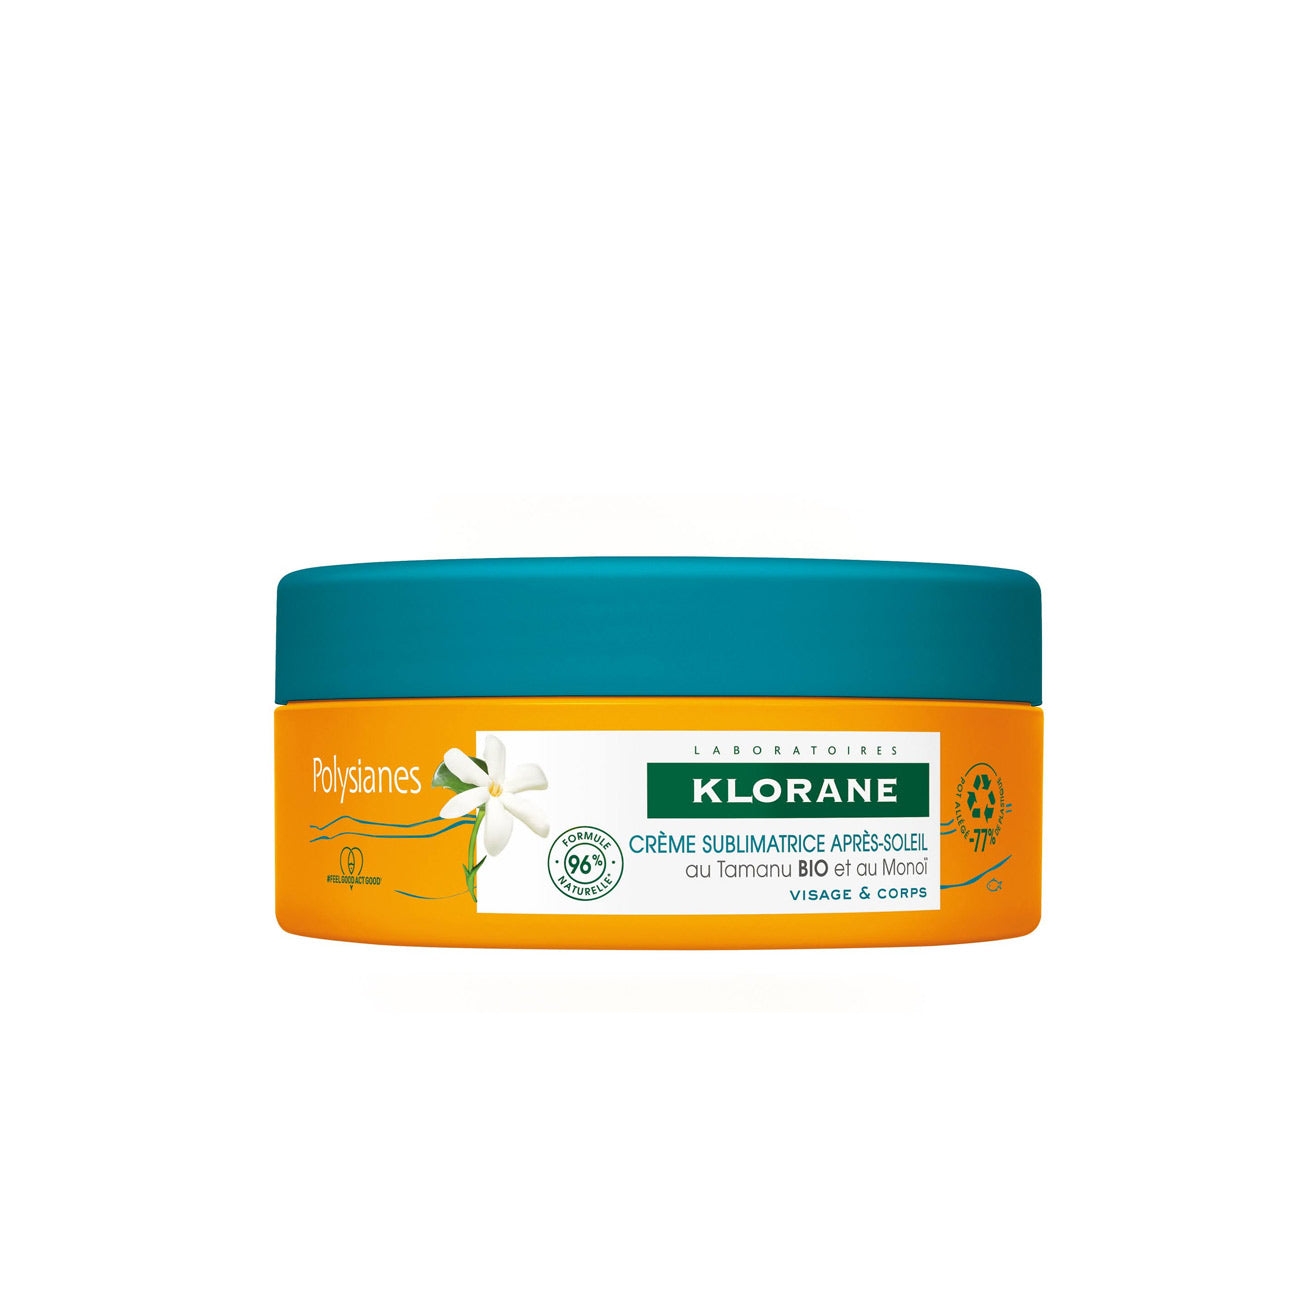 Klorane Polysianes After-Sun Sublimating Cream